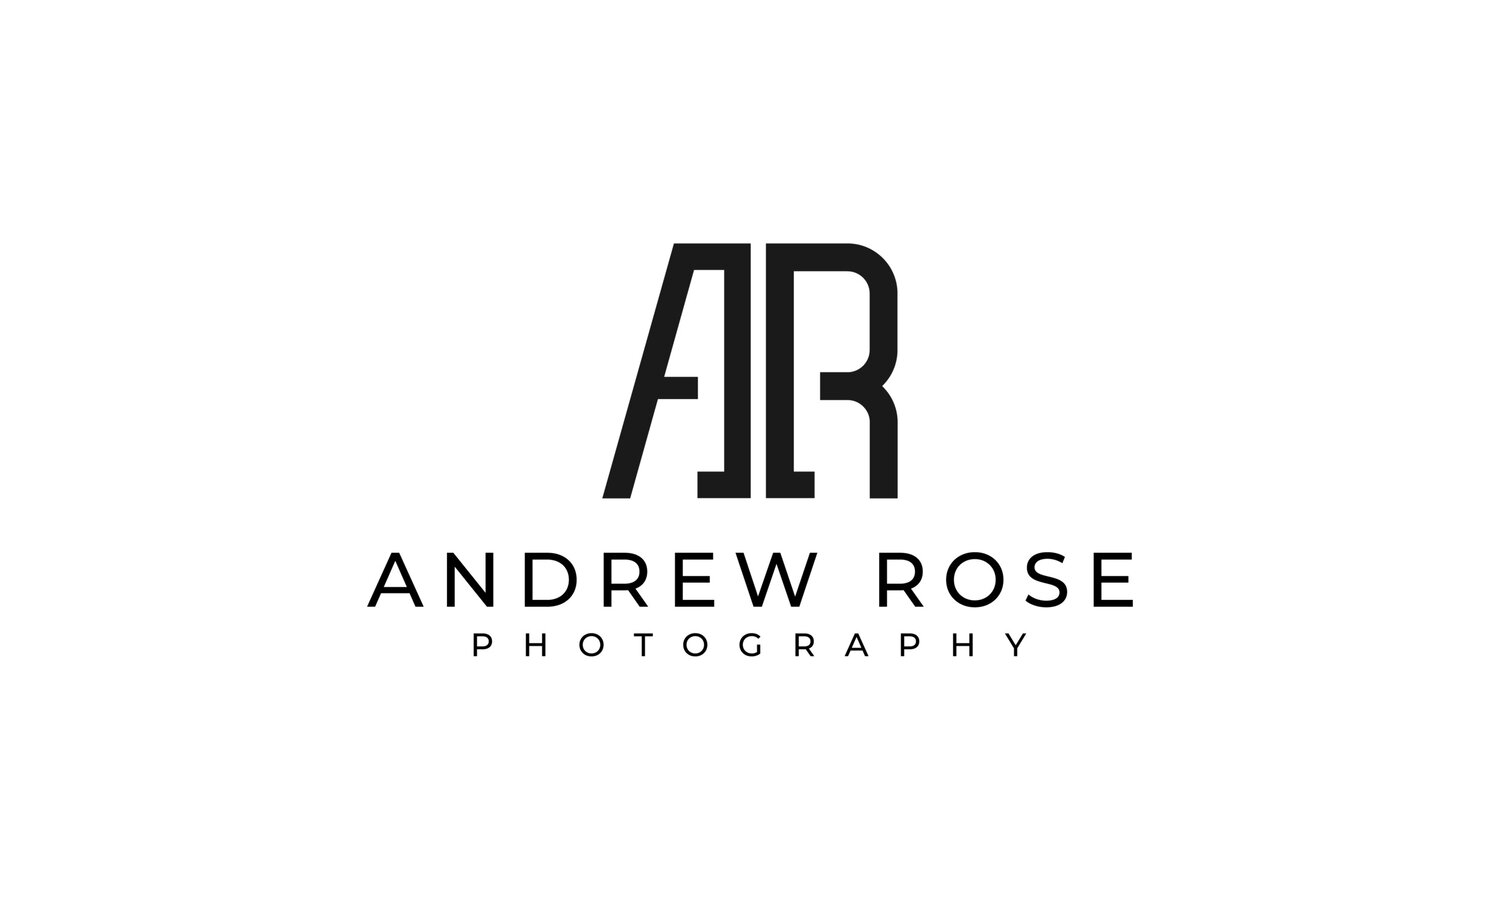 Andrew Rose Photography